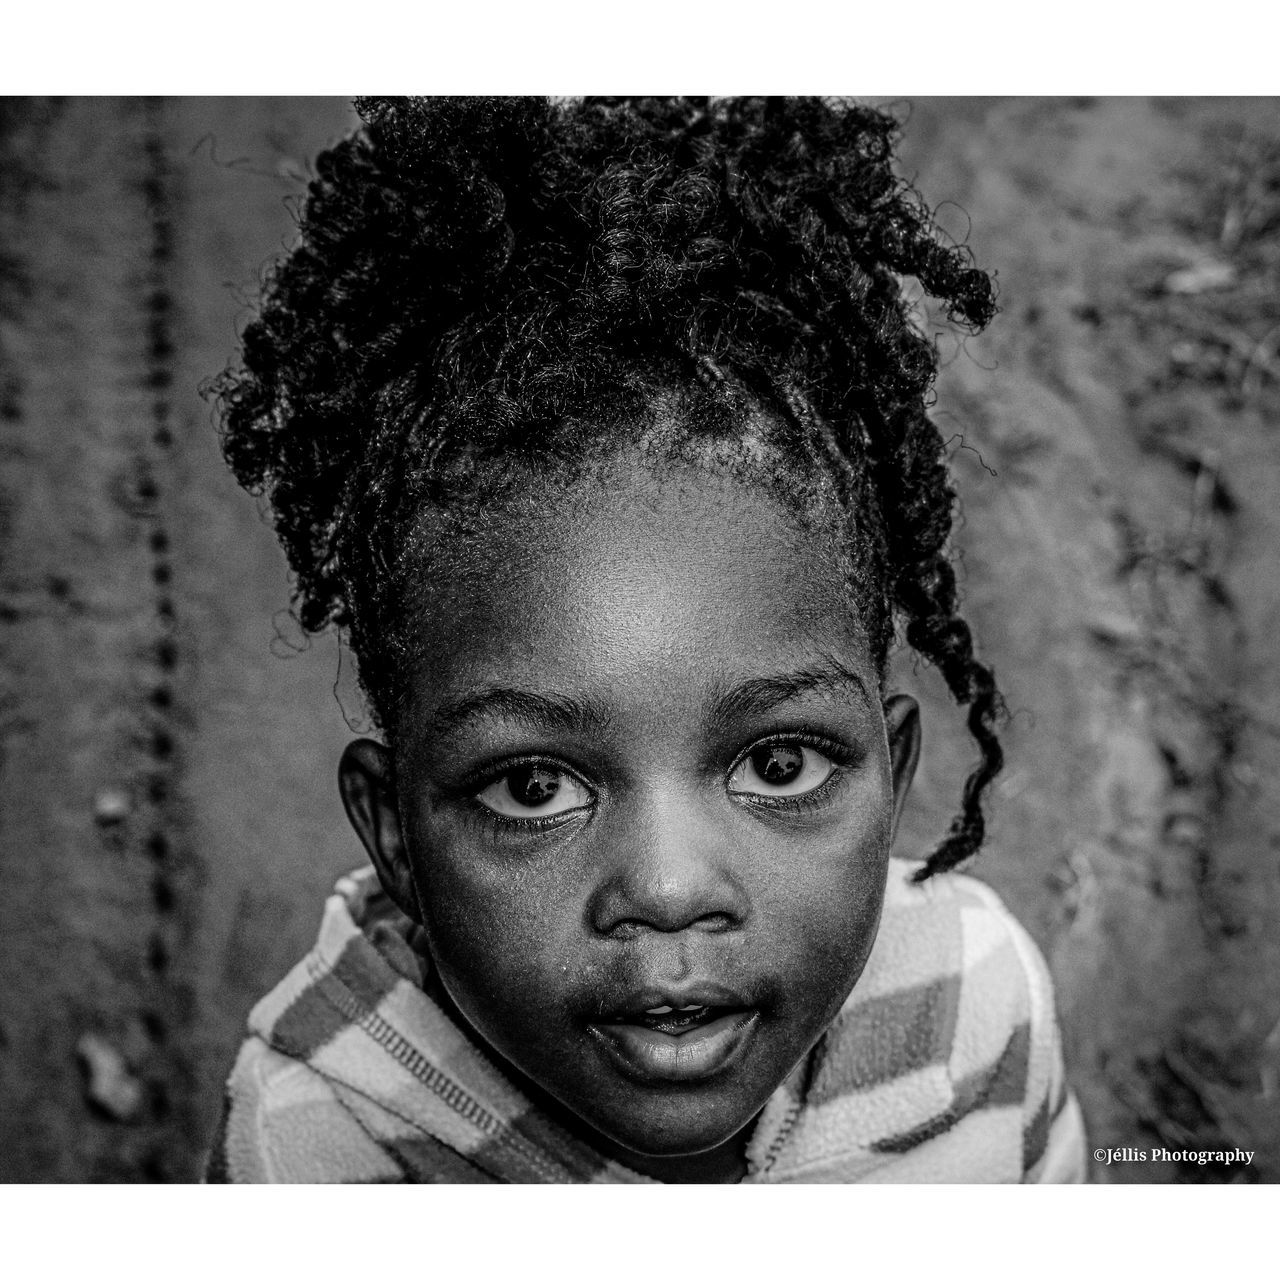 portrait, child, childhood, one person, transfer print, black and white, headshot, hairstyle, auto post production filter, looking at camera, monochrome photography, human hair, curly hair, human face, front view, emotion, smiling, person, men, poverty, dreadlocks, portrait photography, female, lifestyles, monochrome, close-up, cute, women, human head, toddler, casual clothing, innocence